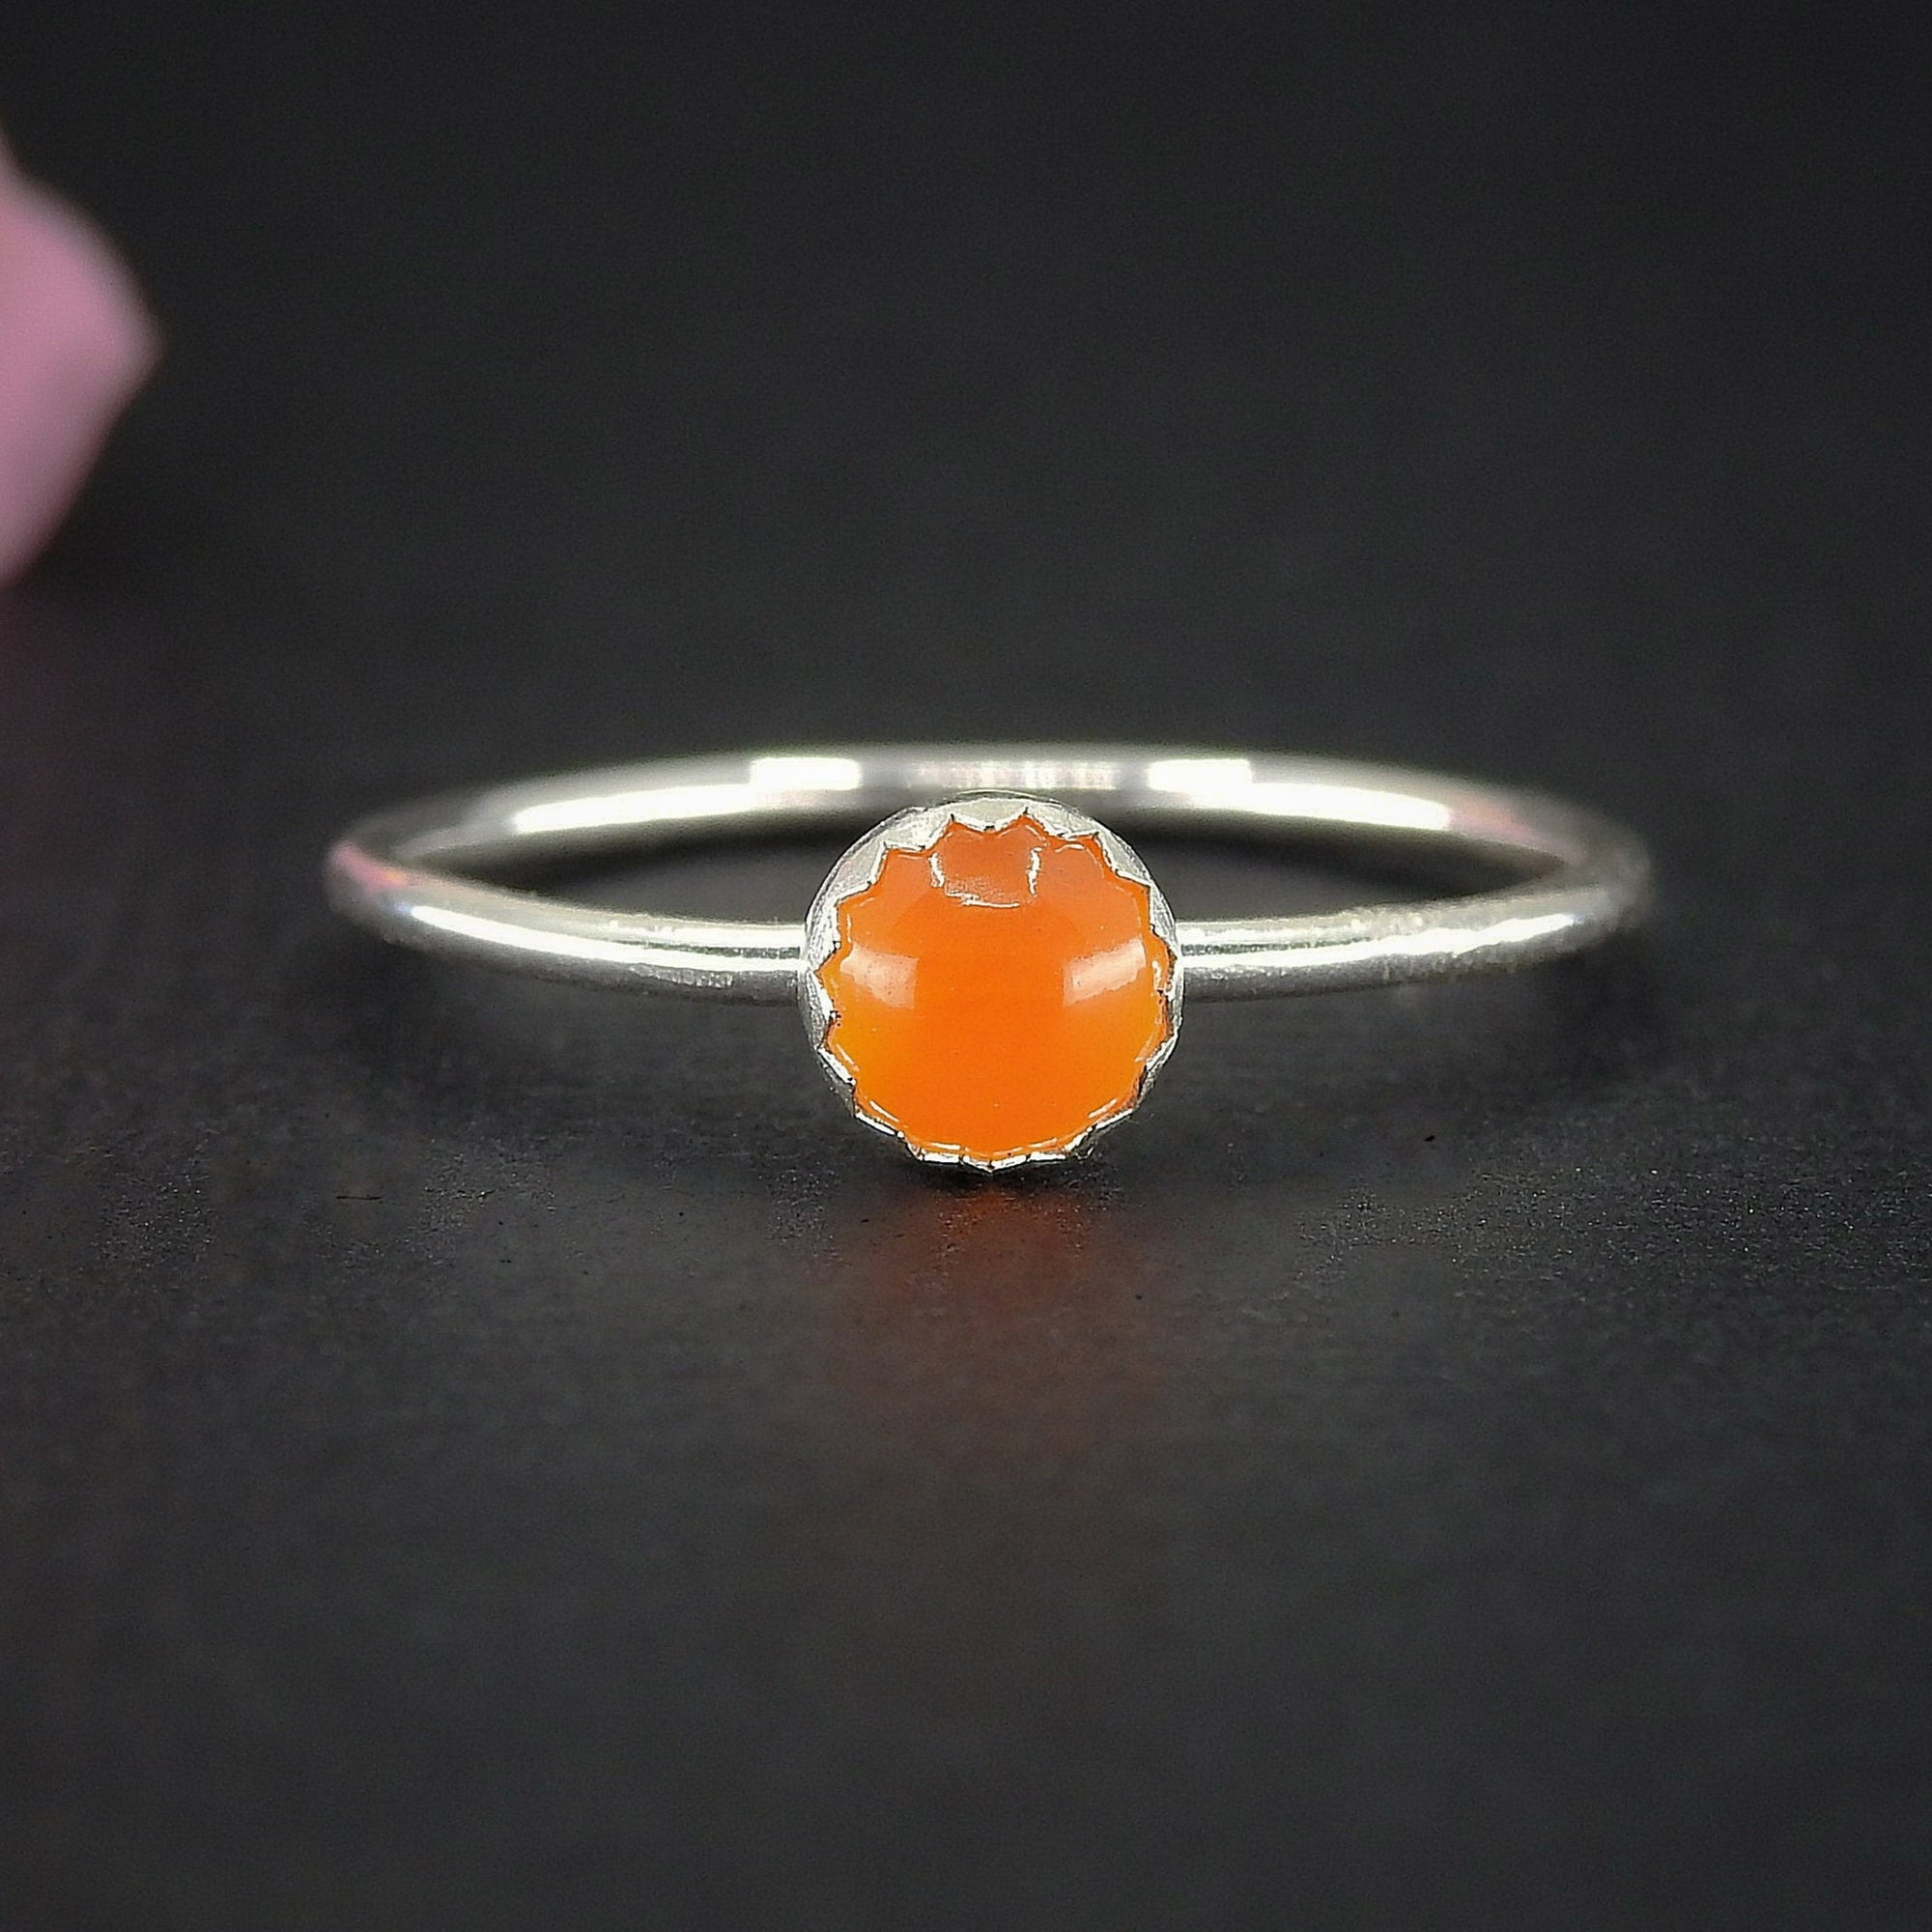 Carnelian Ring - Made to Order 